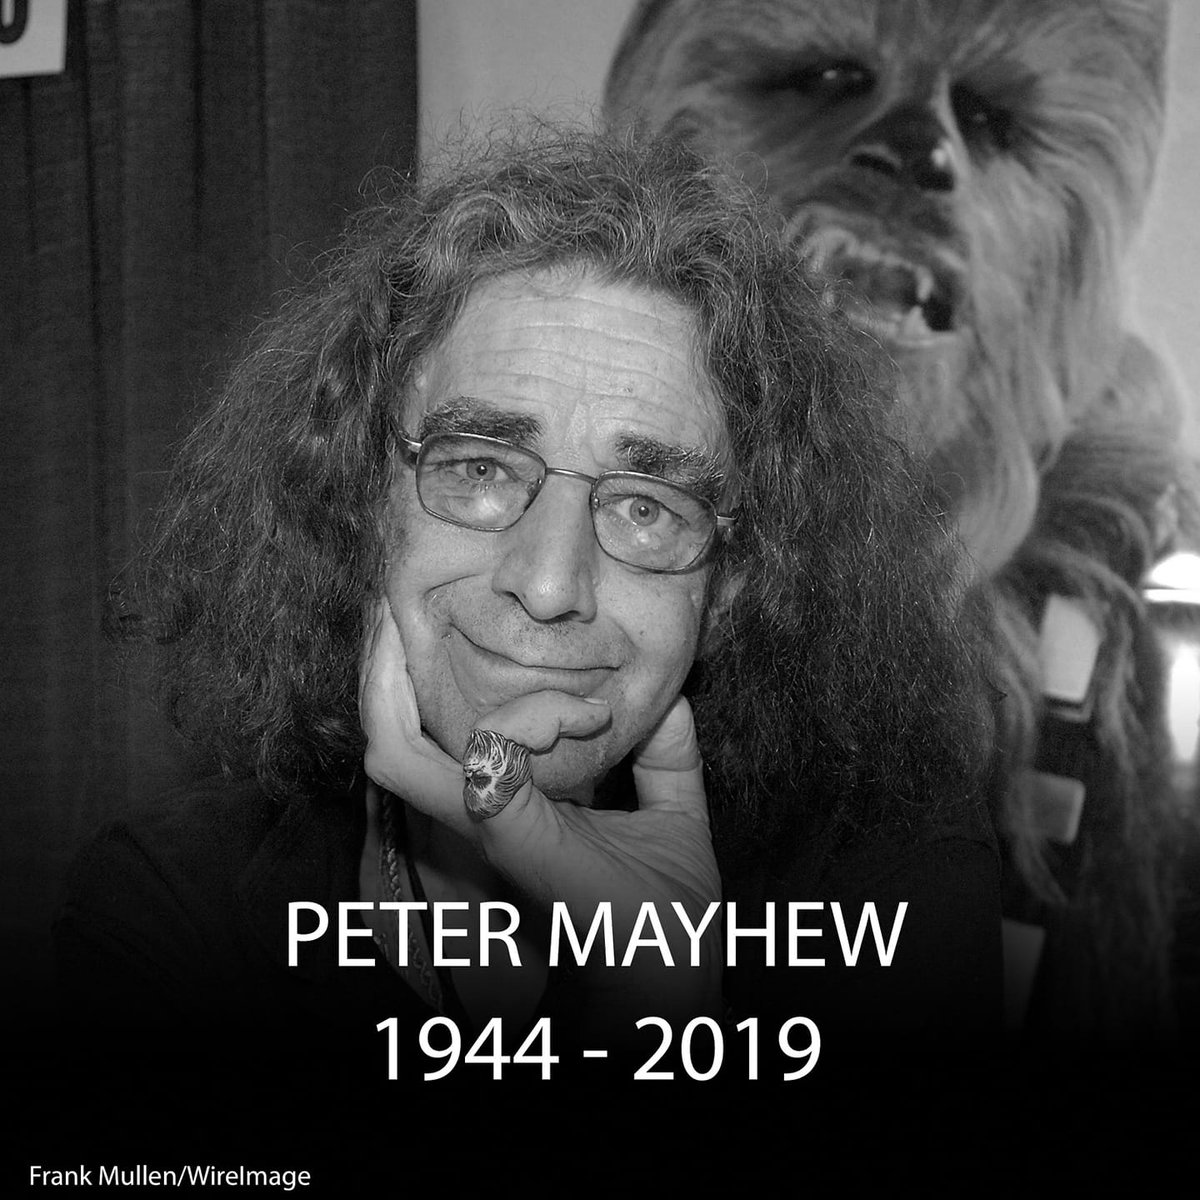 Remembering the great 𝗣𝗲𝘁𝗲𝗿 𝗠𝗮𝘆𝗵𝗲𝘄 who became one with the Force 5 years ago today.